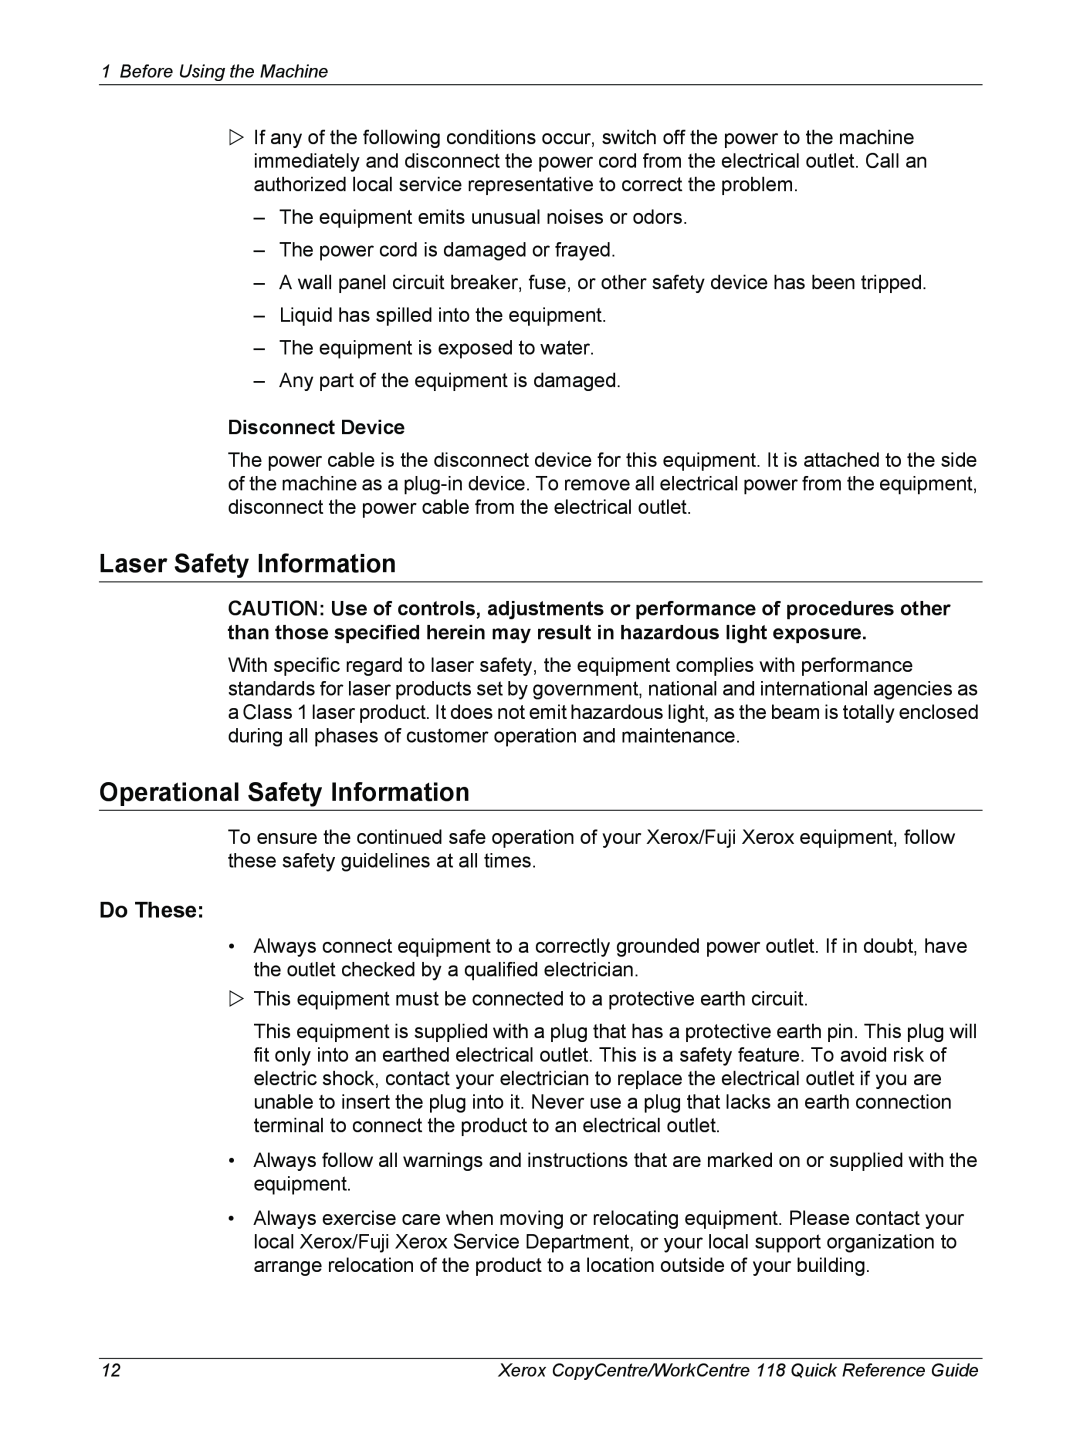 Xerox C118, M118i manual Laser Safety Information, Operational Safety Information, Do These, Disconnect Device 